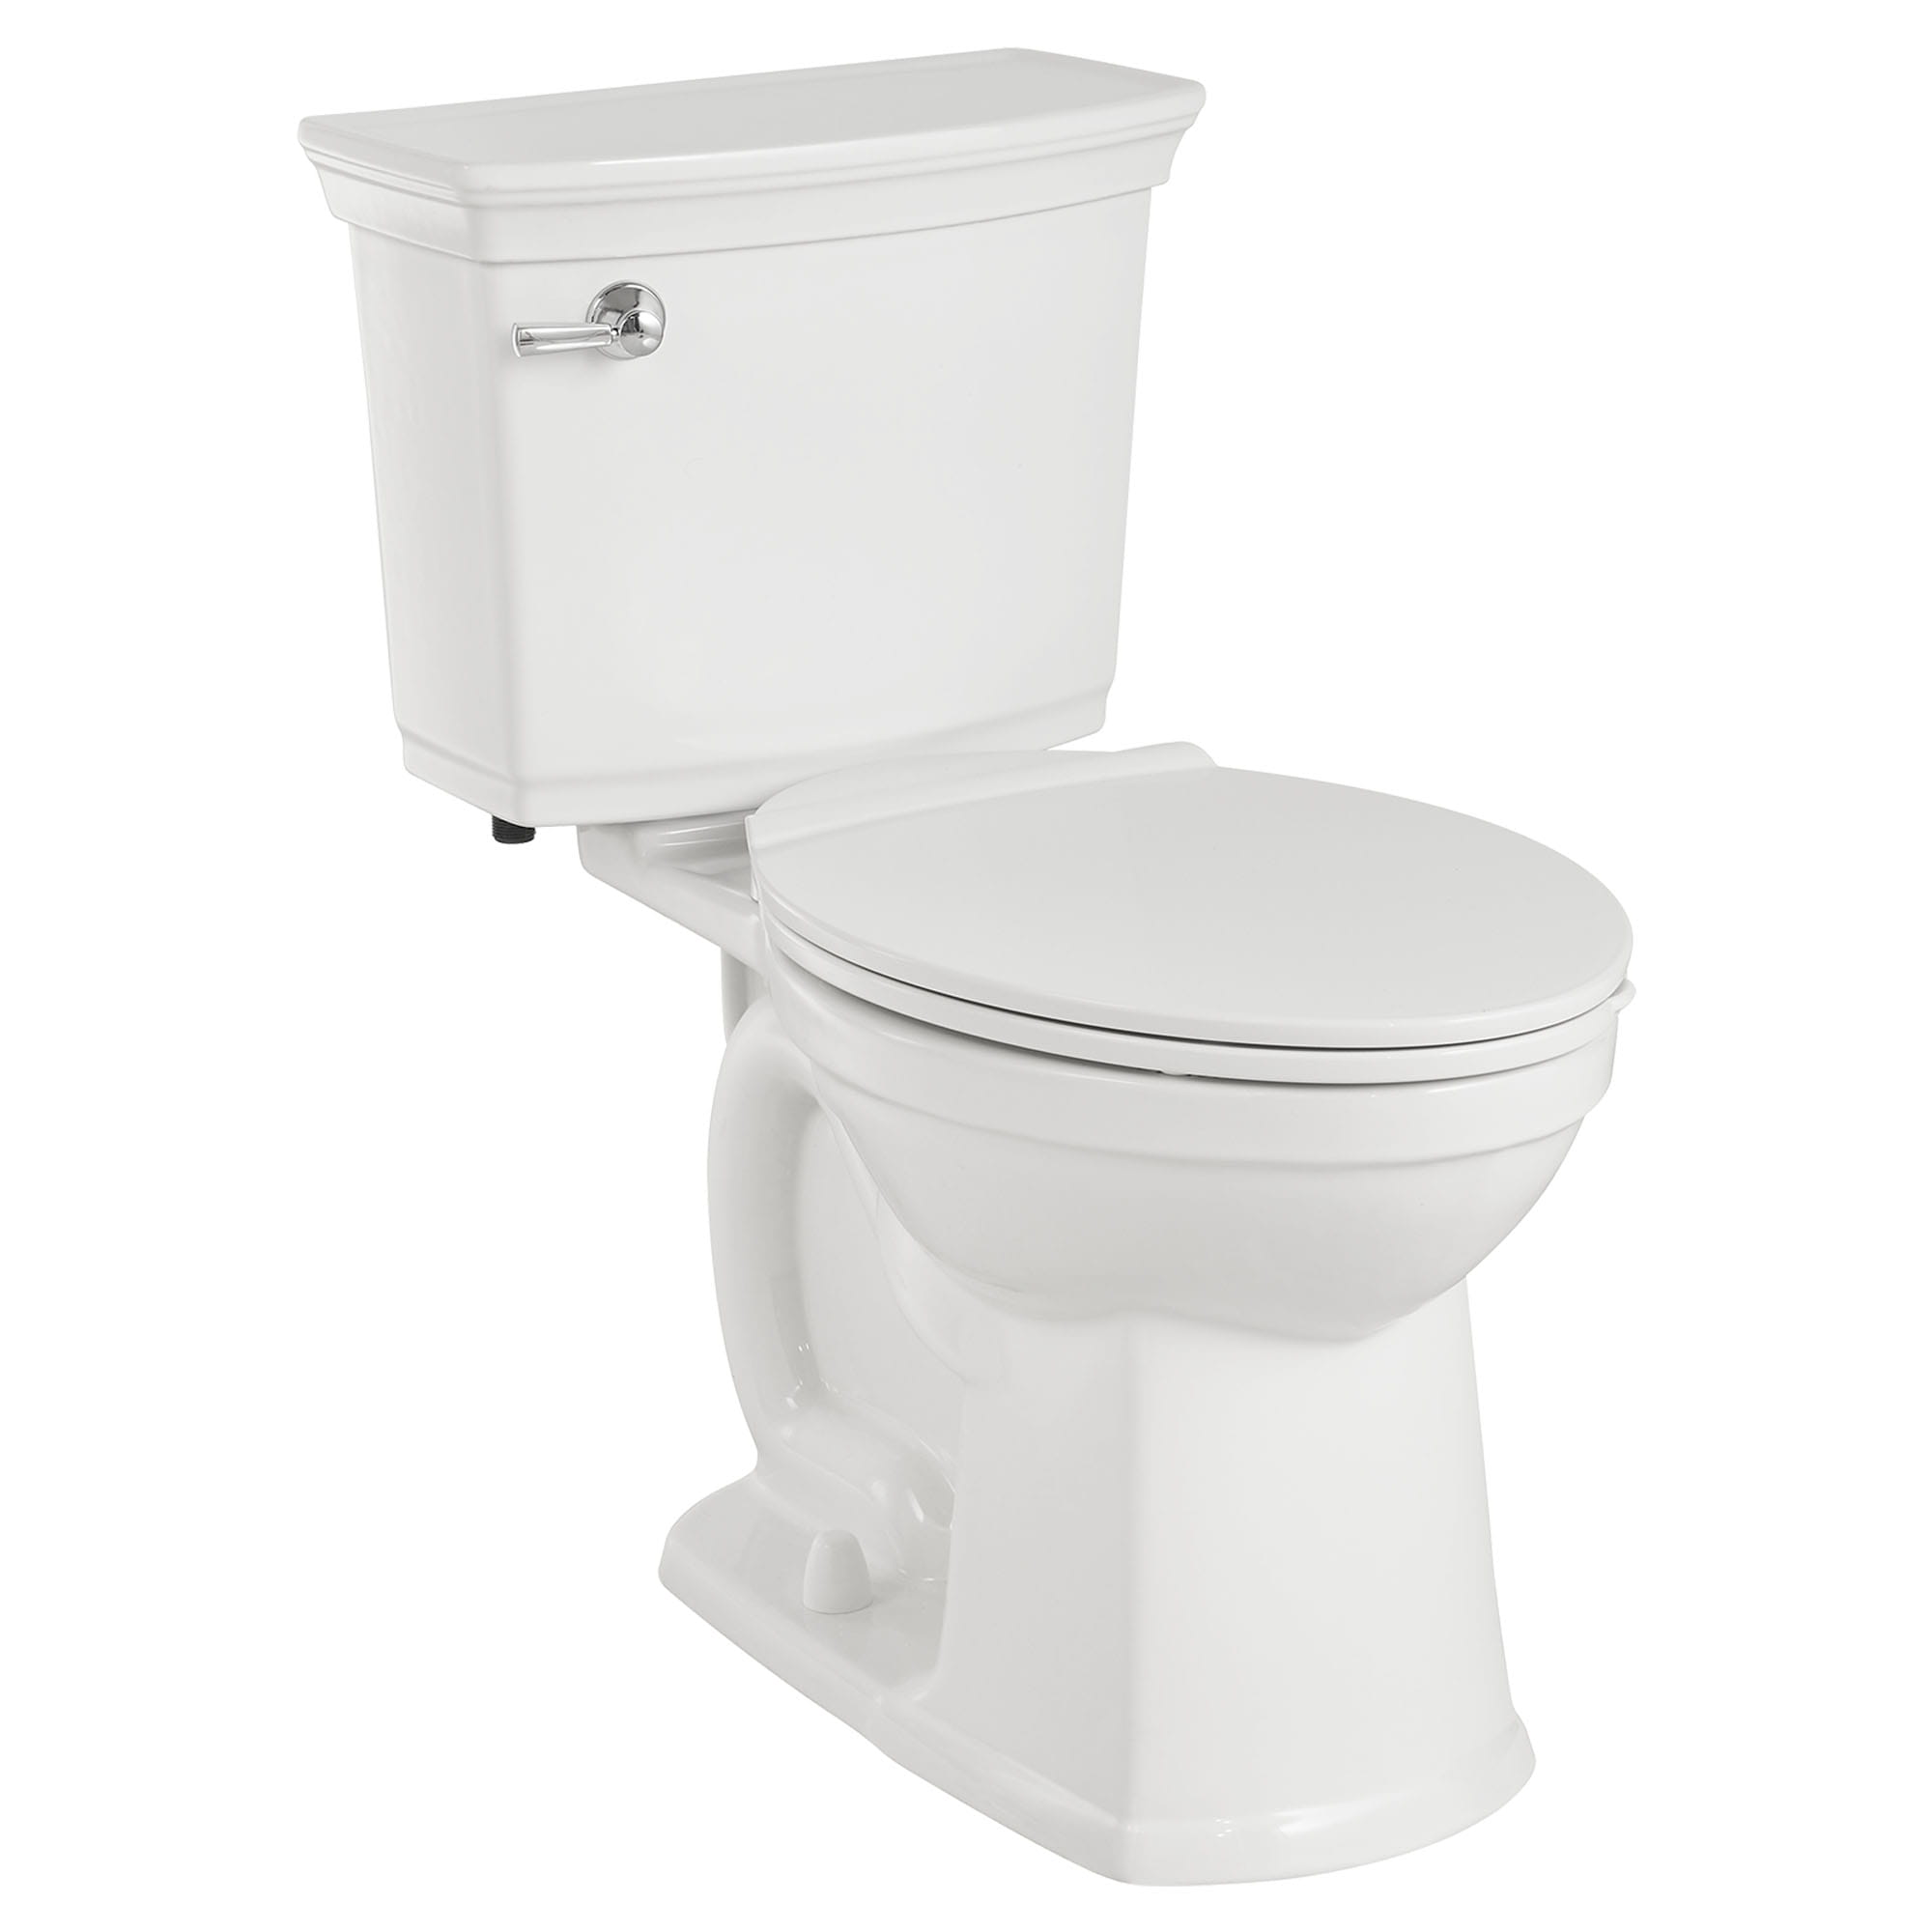 Vormax Plus 1.28 GPF/4.8 LPF Left Trip Lever 16-1/2-in. Elongated-Front Self-Cleaning Toilet with Seat